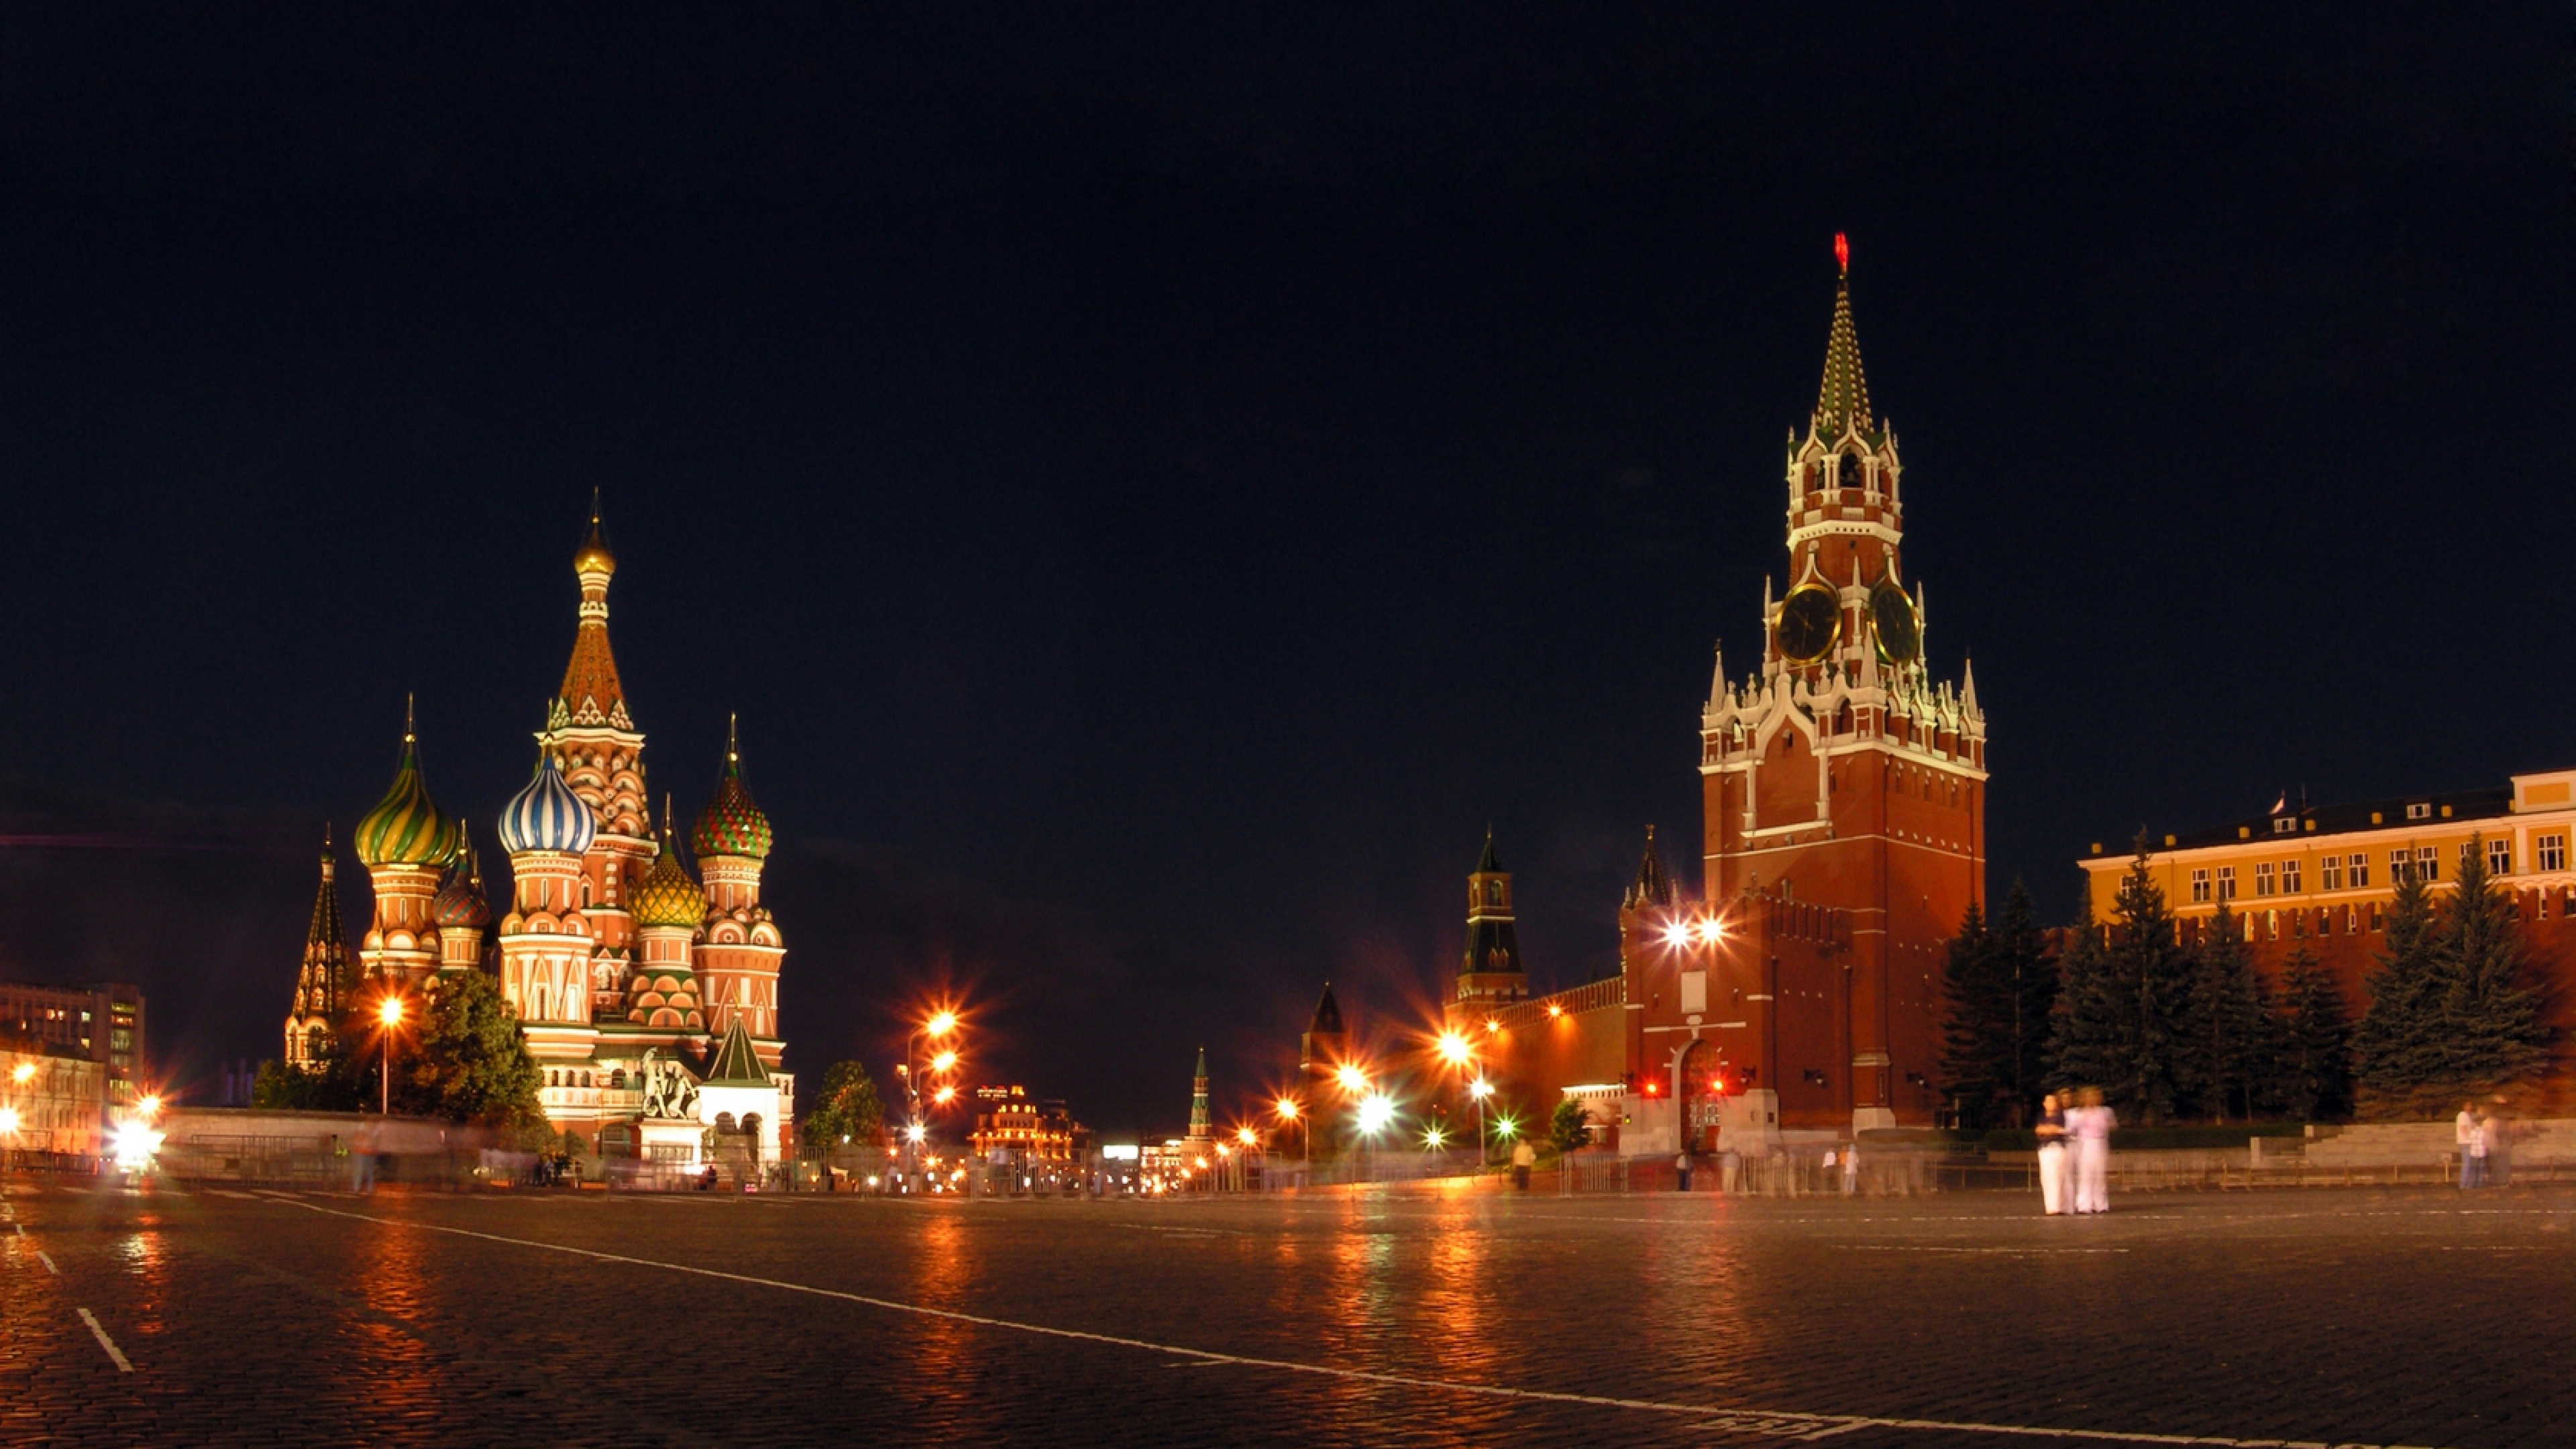 Moscow: The capital of Russia, Red Square, Kremlin, Landmarks. 3840x2160 4K Wallpaper.